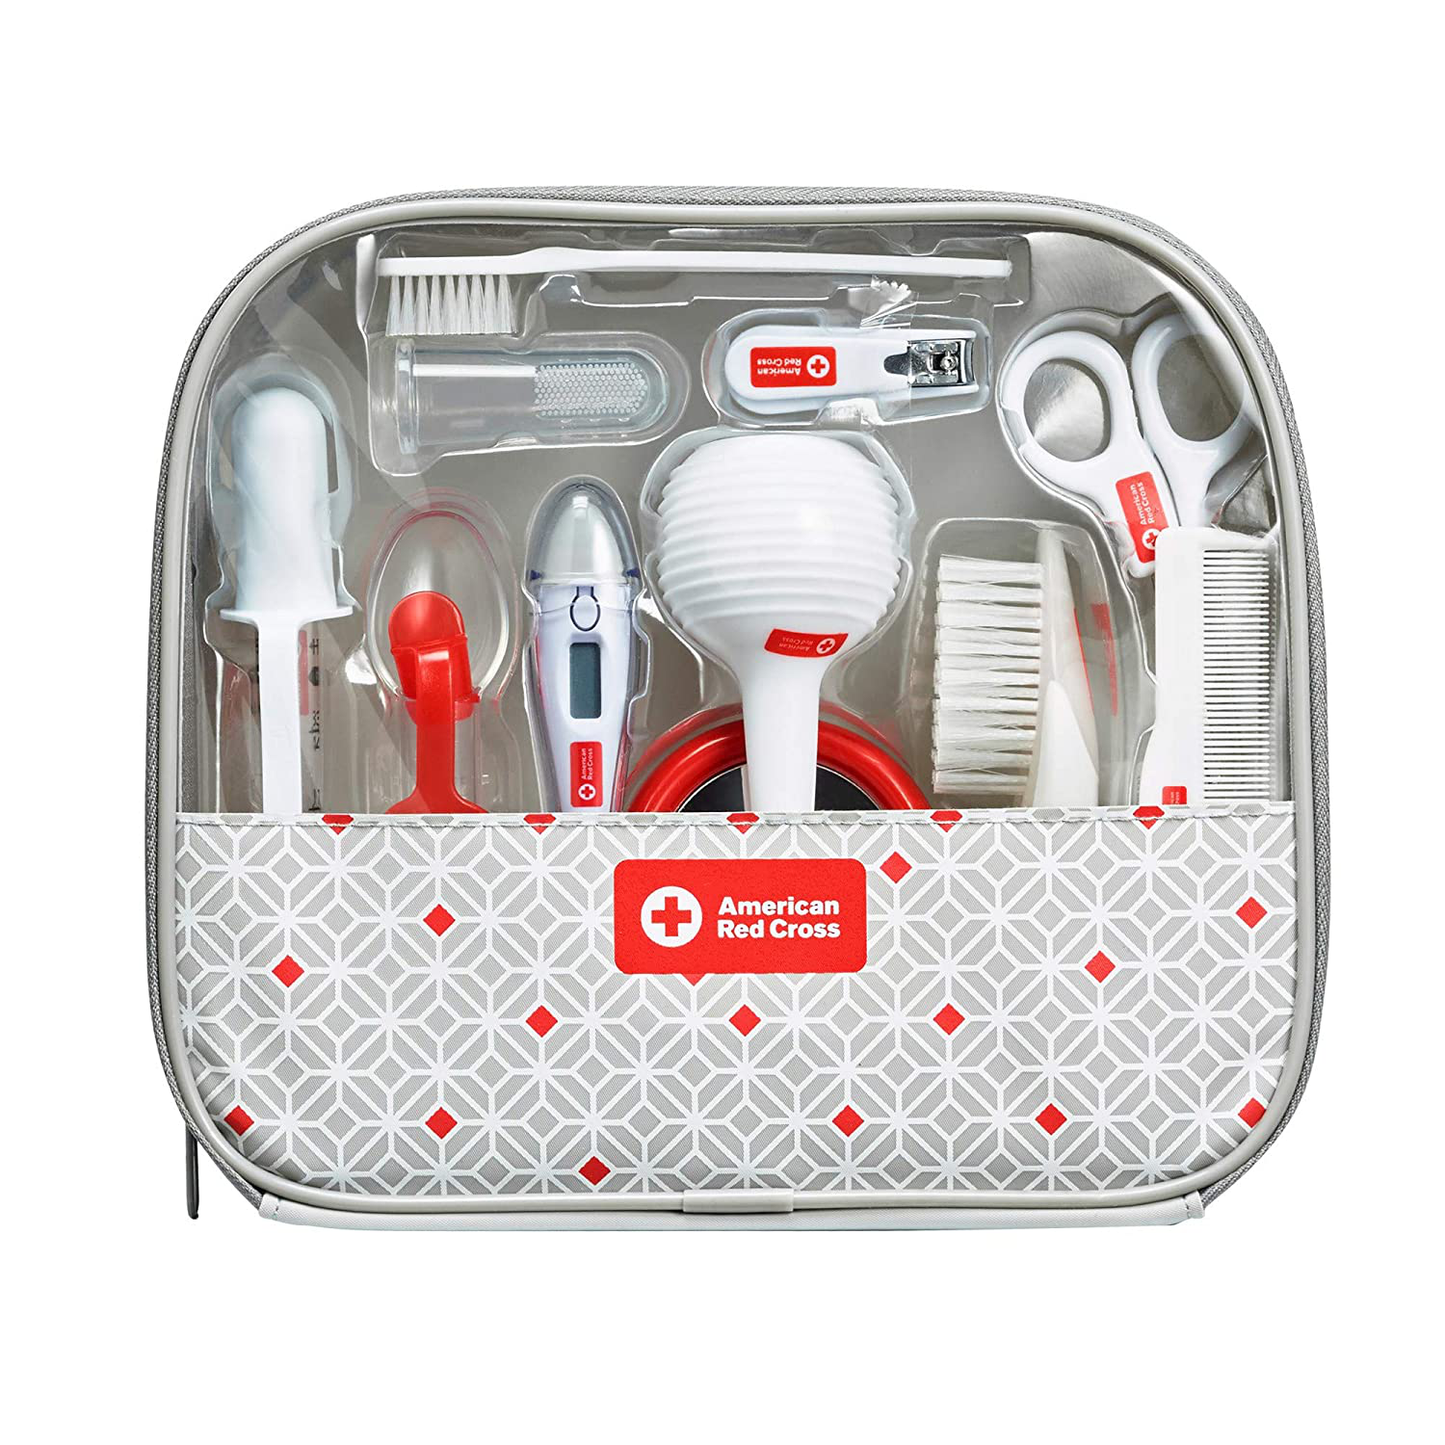 American Red Cross Deluxe Health and Grooming Kit| Infant and Baby Grooming | Infant and Baby Health | Thermometer, Medicine Dispenser, Comb, Brush, Nail Clippers and More with Convenient Tote